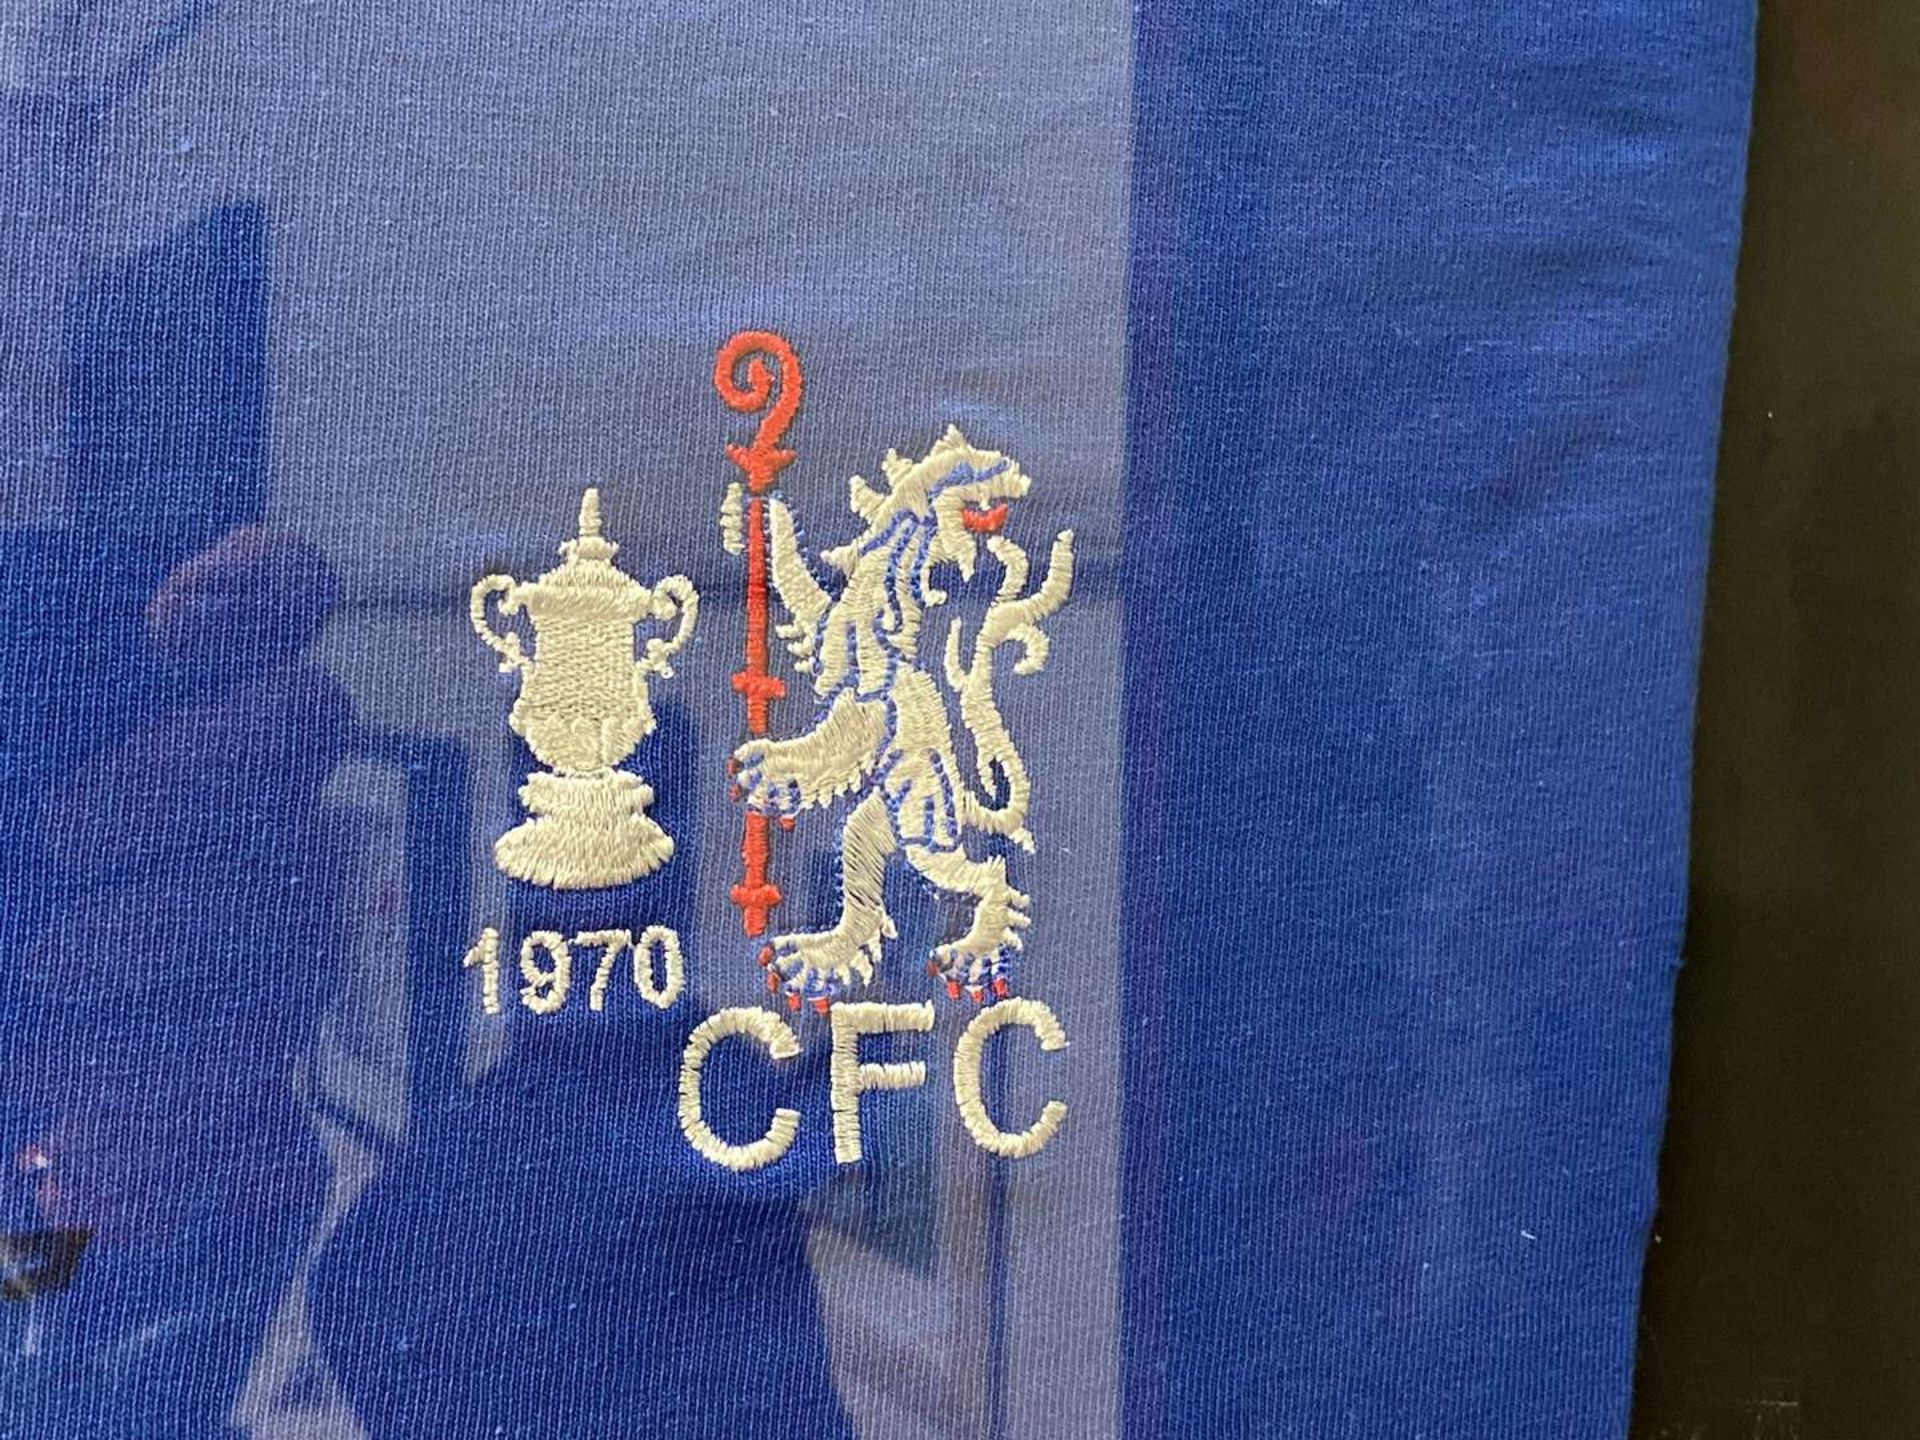 CHELSEA FC, a replica 1970, winning FA Cup final shirt, signed by Ron “Chopper” Harris. - Image 4 of 4